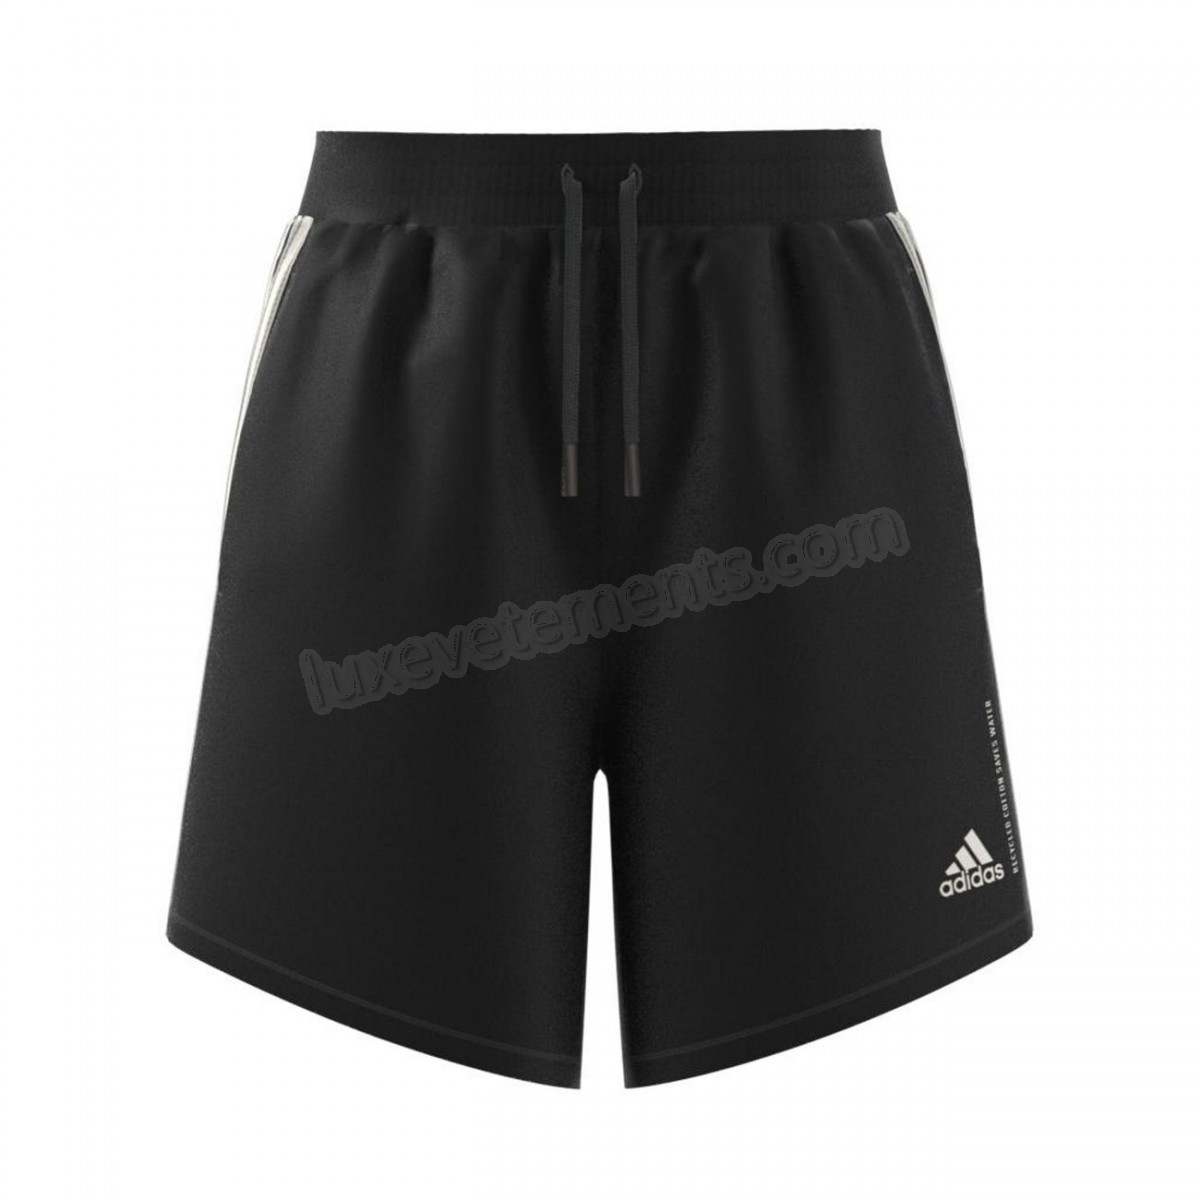 Adidas-Fitness femme ADIDAS Short femme adidas Must Haves Recycled Cotton Vente en ligne - -9